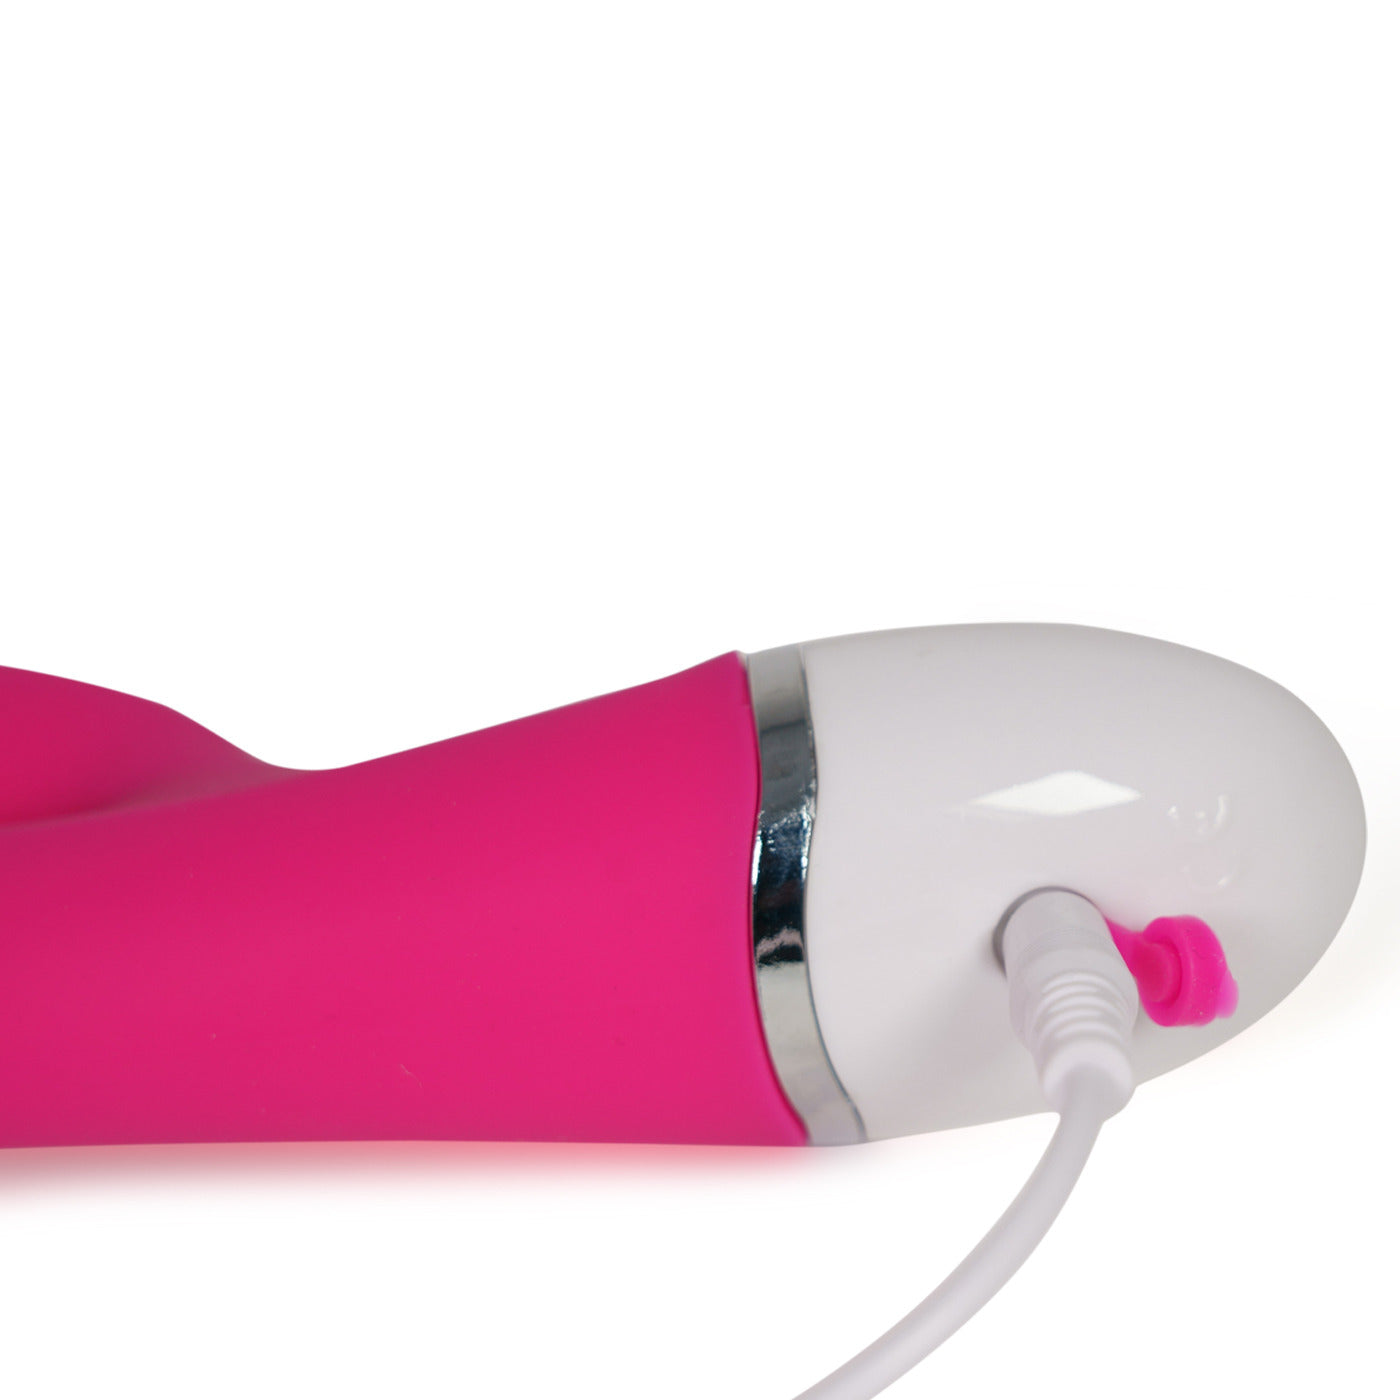 DUALITY 8 Function Extra Quiet Rechargeable G-Spot Rabbit